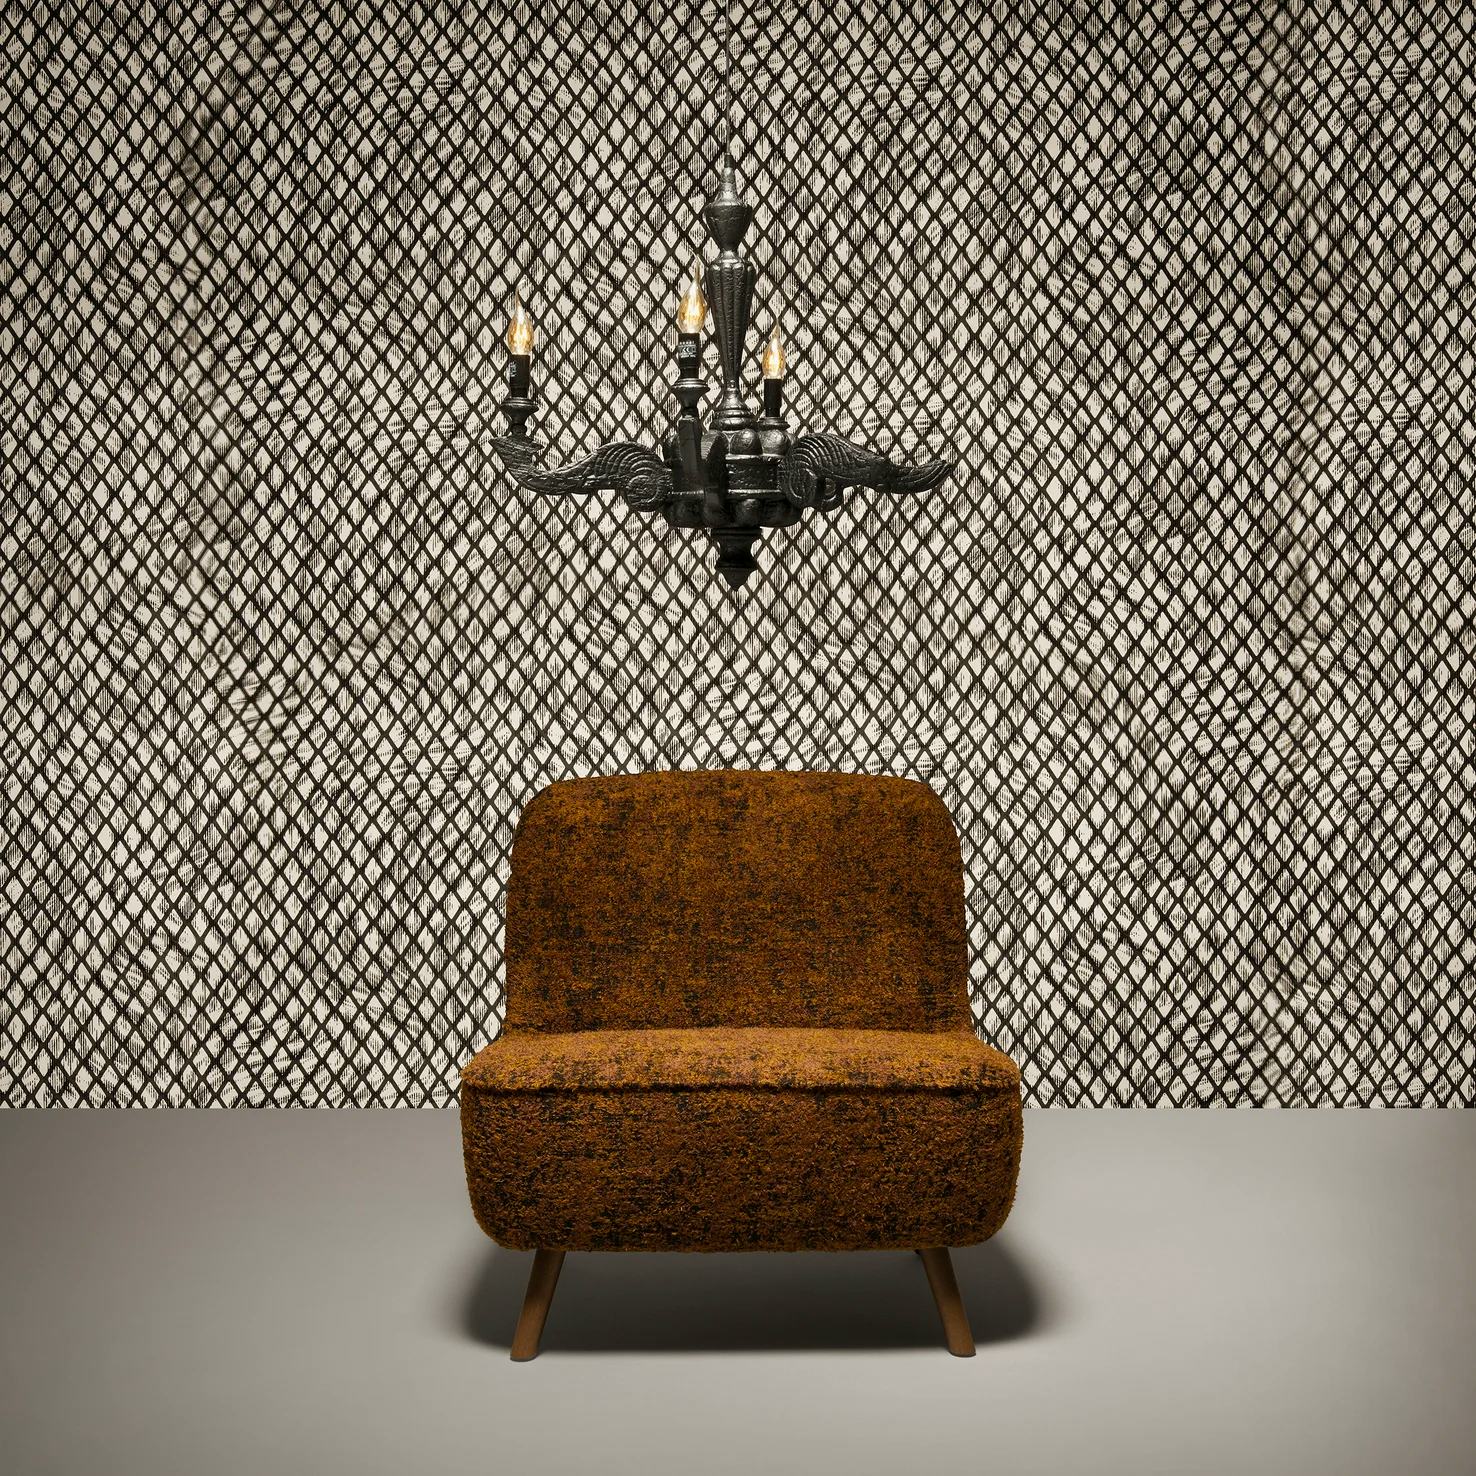 Poetic composition Cocktail Chair, Smoke Chandelier and Moooi Wallcovering